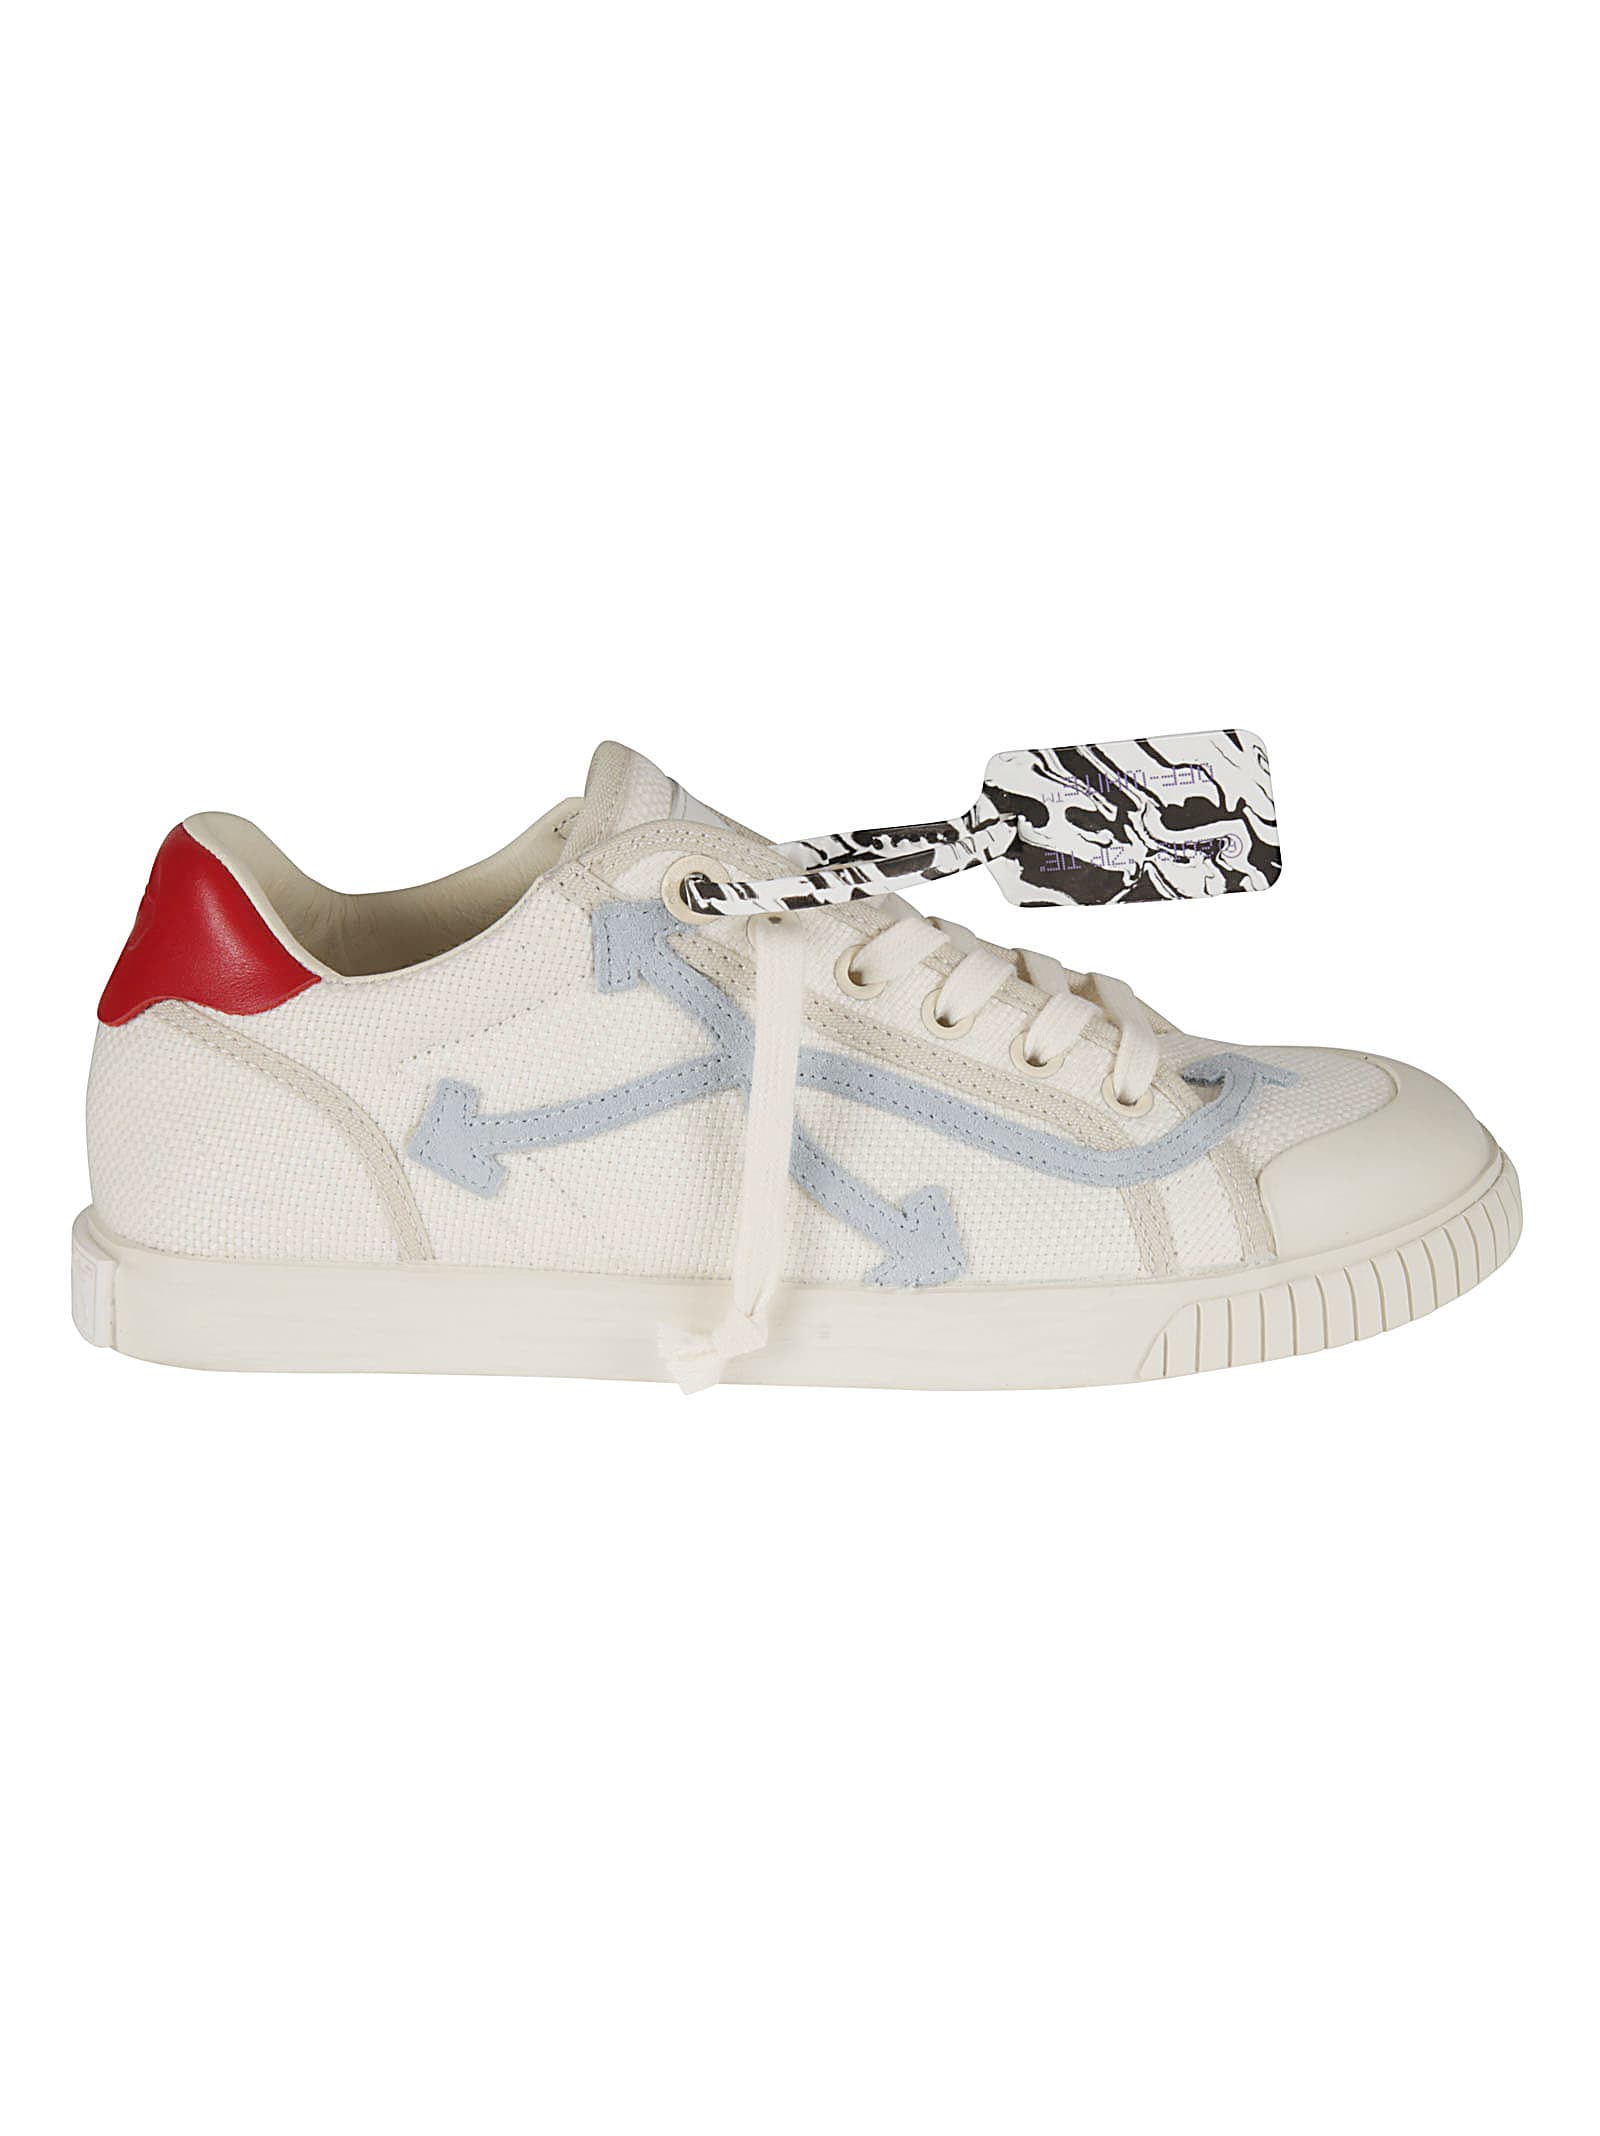 OFF-WHITE NEW LOW VULCANIZED trainers,OMIA213 S21FAB0010140